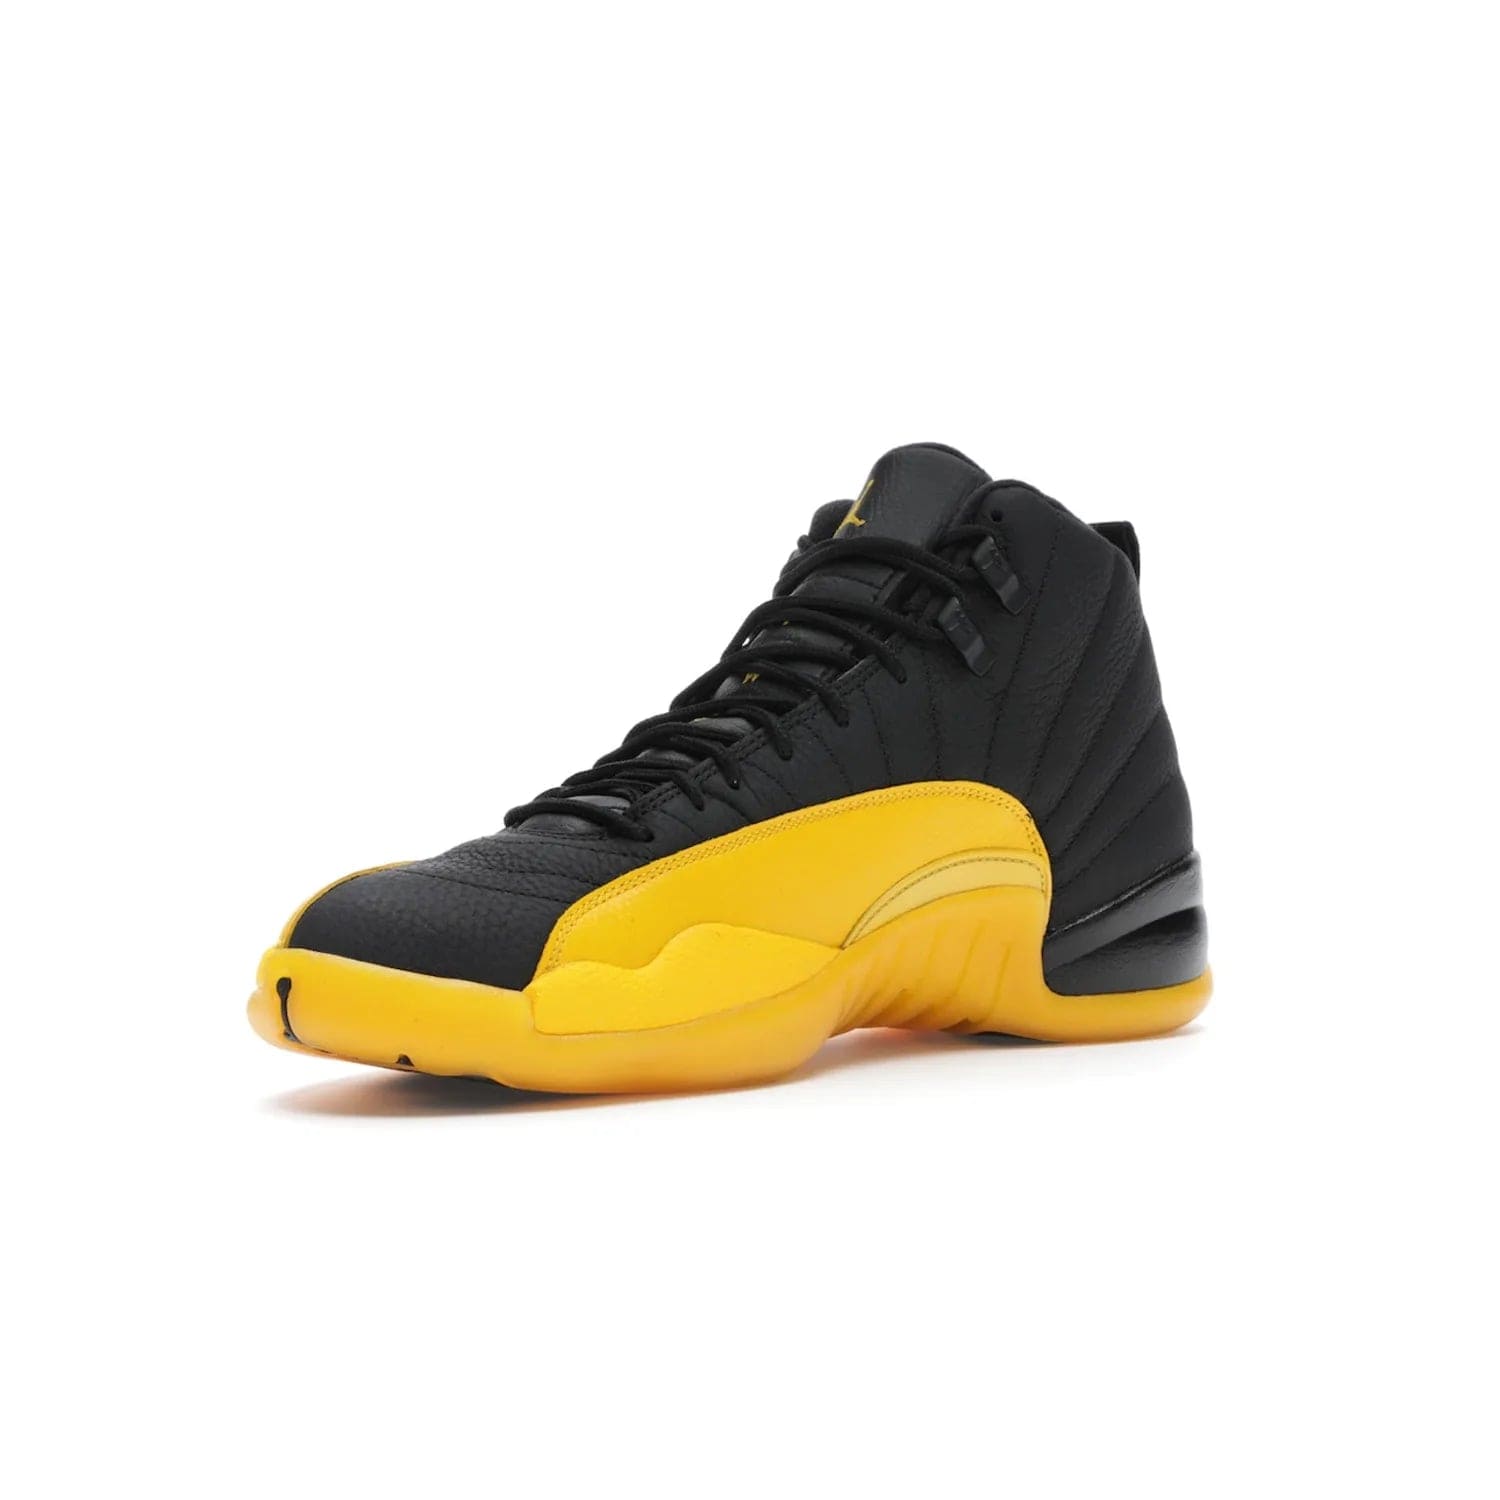 Jordan 12 Retro Black University Gold - Image 15 - Only at www.BallersClubKickz.com - This Jordan 12 Retro features a black tumbled leather upper and University Gold accents for a modern twist. Boasting Jordan "Two Three" branding and a yellow sole, these shoes will elevate your wardrobe. Fresh, sleek, and one of a kind - the Jordan 12 University Gold is your summer sneaker.